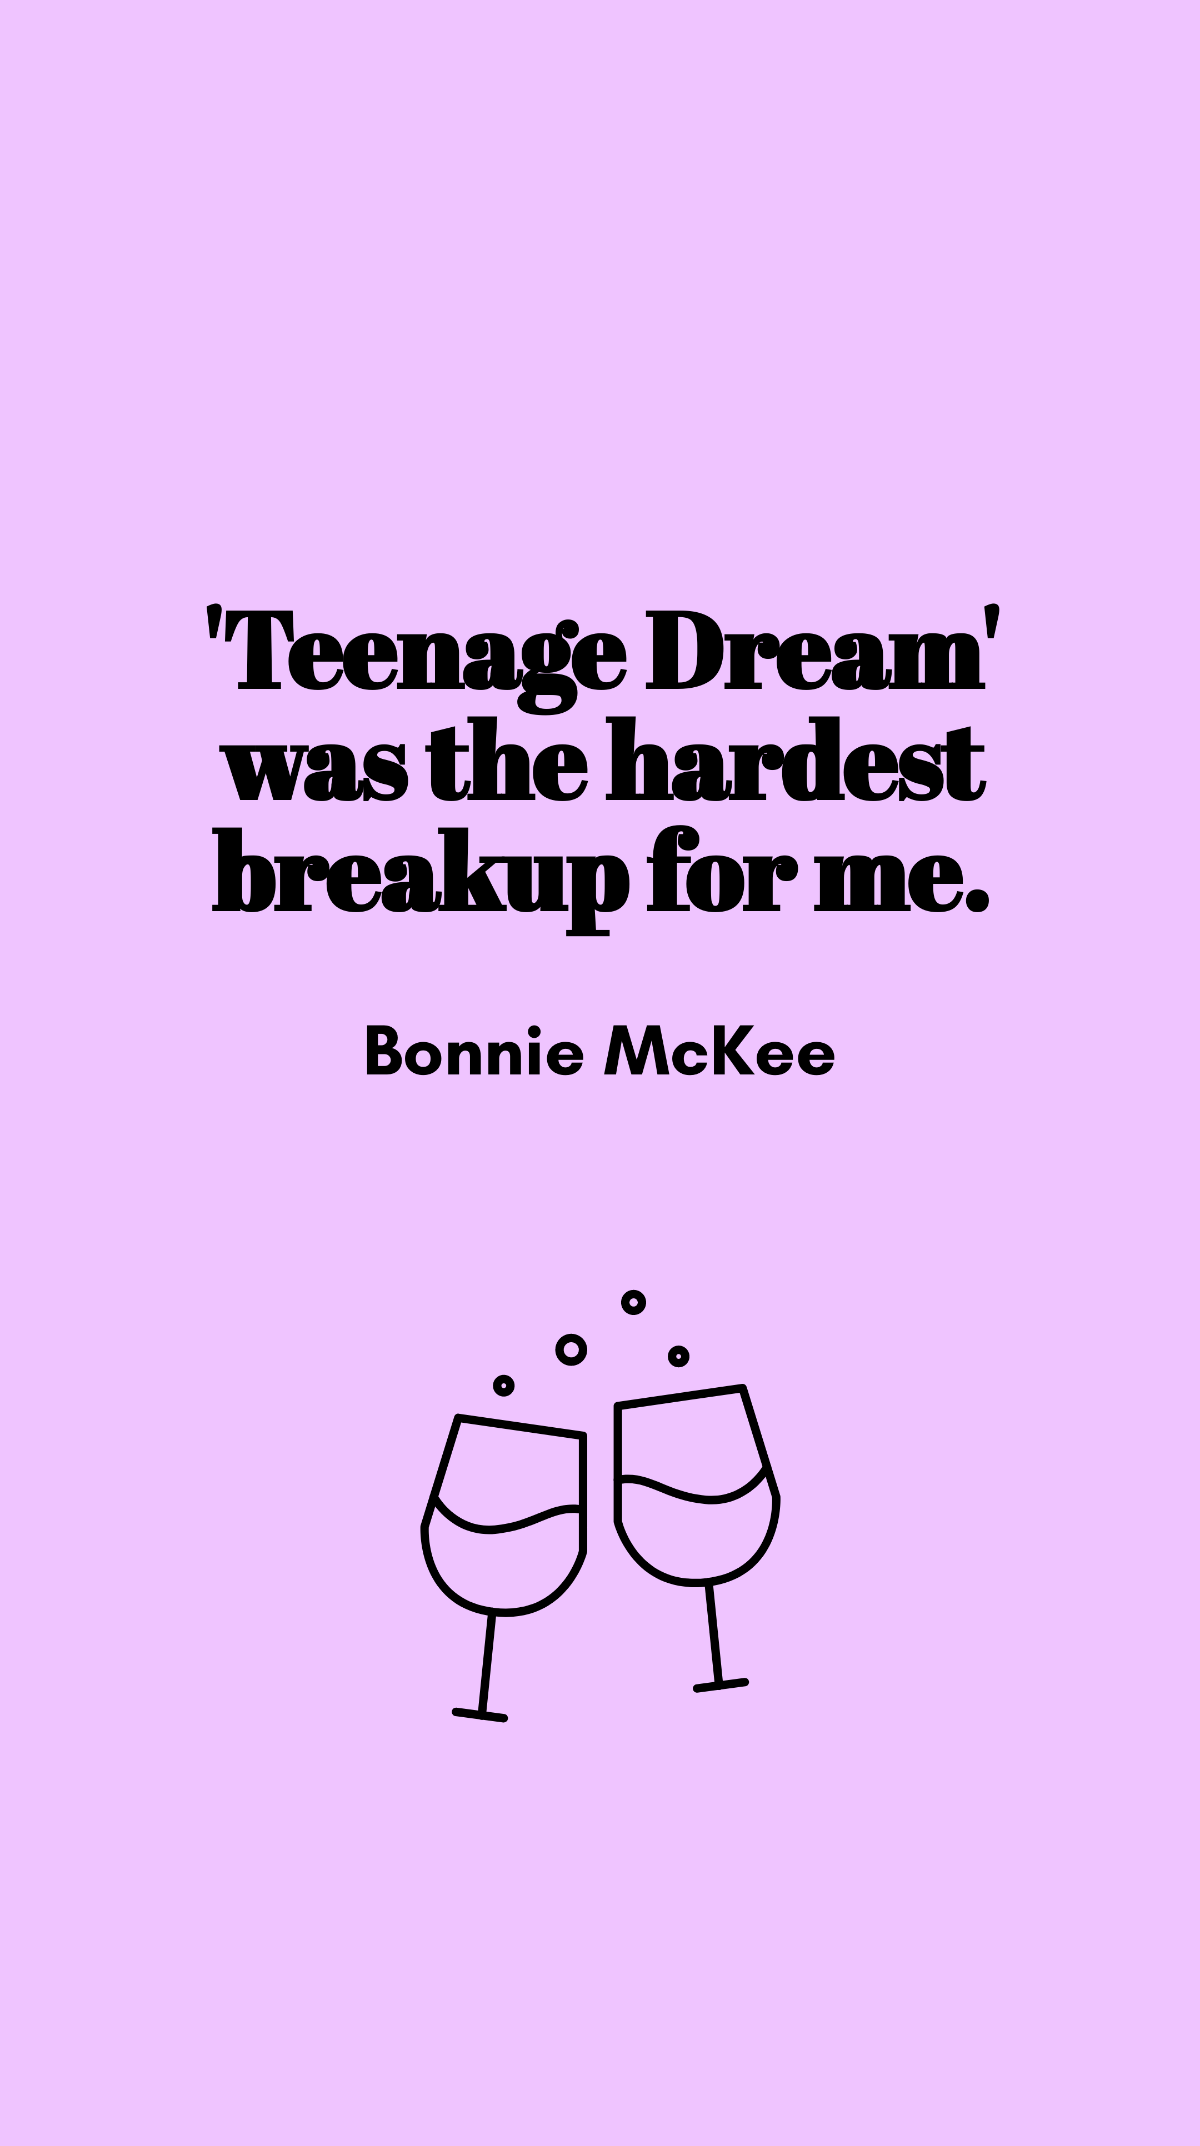 Bonnie McKee - 'Teenage Dream' was the hardest breakup for me. Template